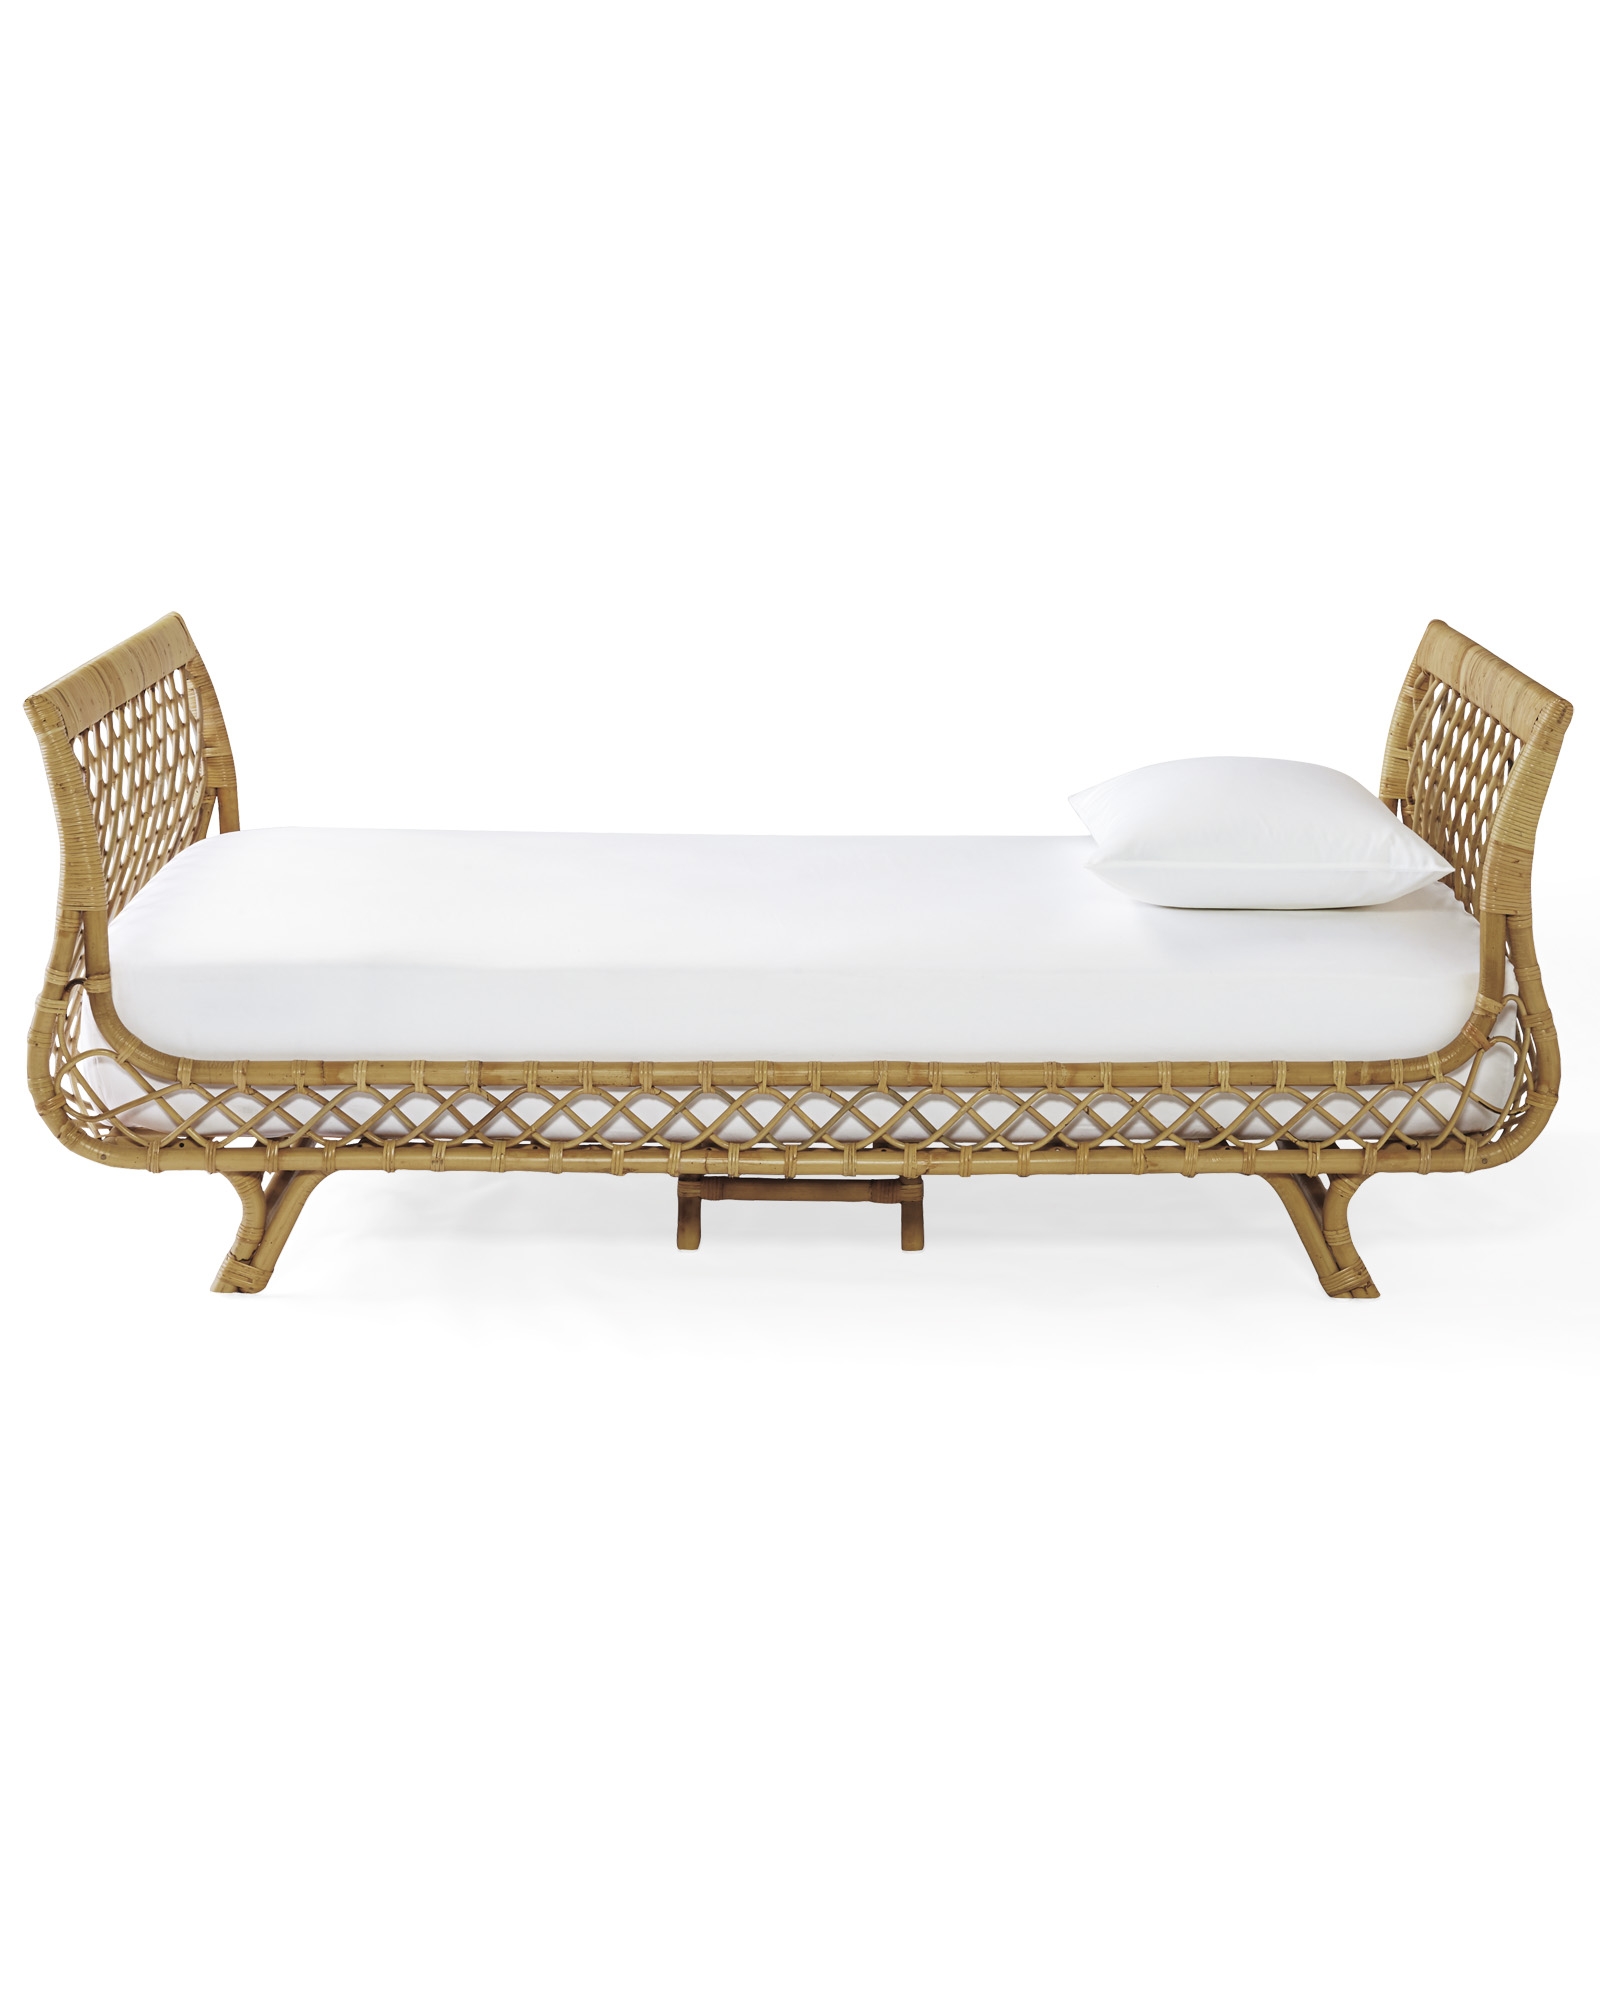 Avalon Daybed - Image 2